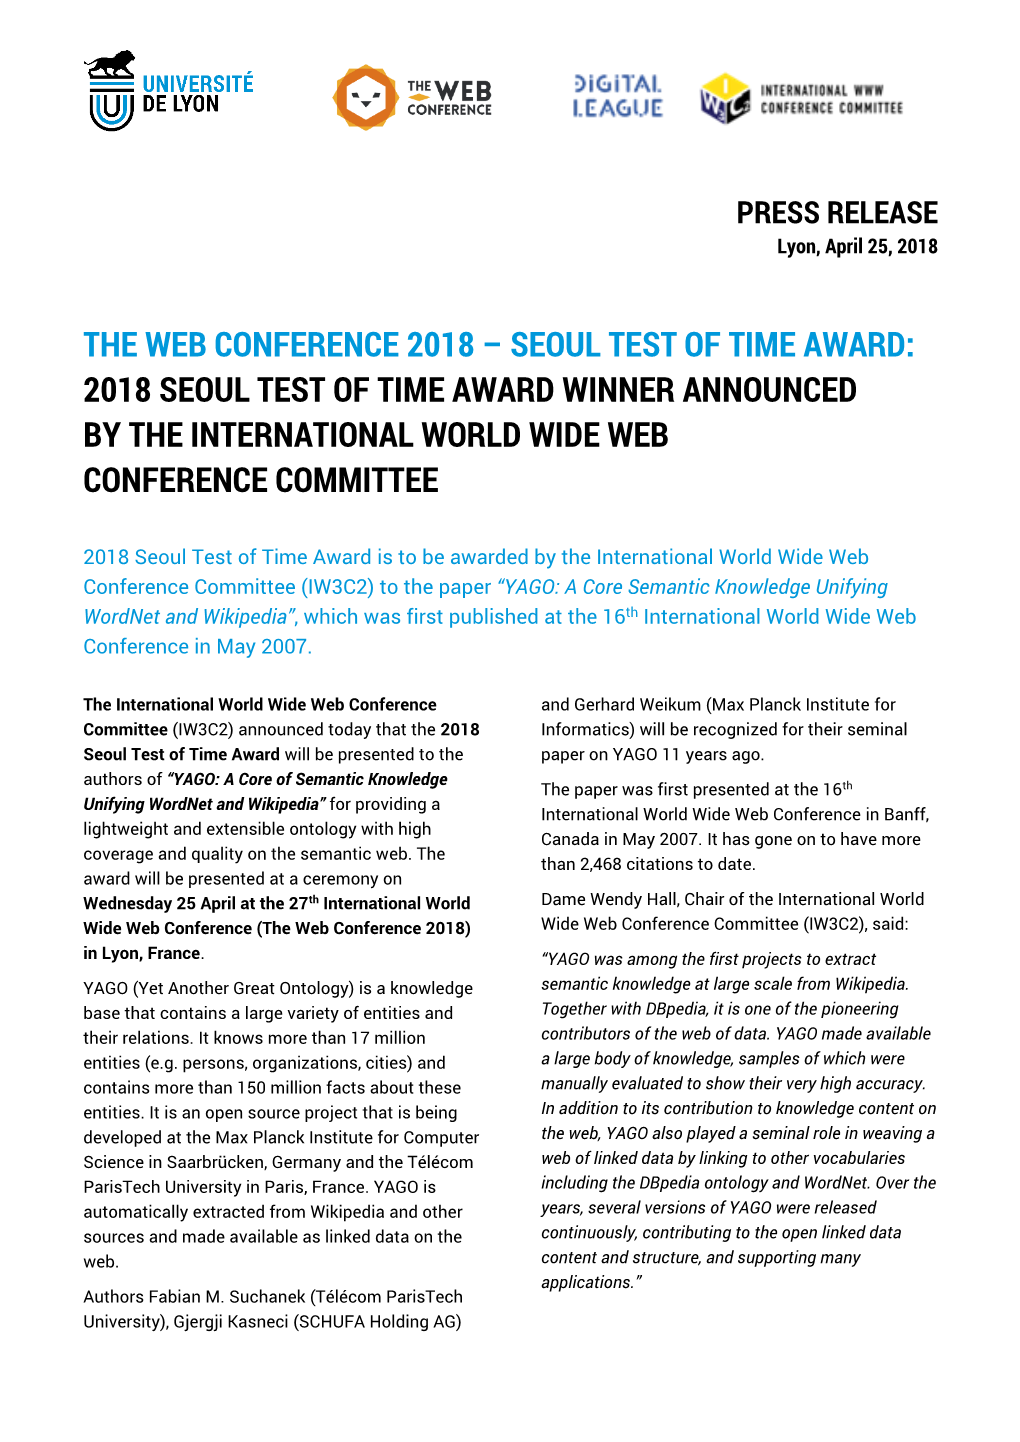 The Web Conference 2018 – Seoul Test of Time Award: 2018 Seoul Test of Time Award Winner Announced by the International World Wide Web Conference Committee